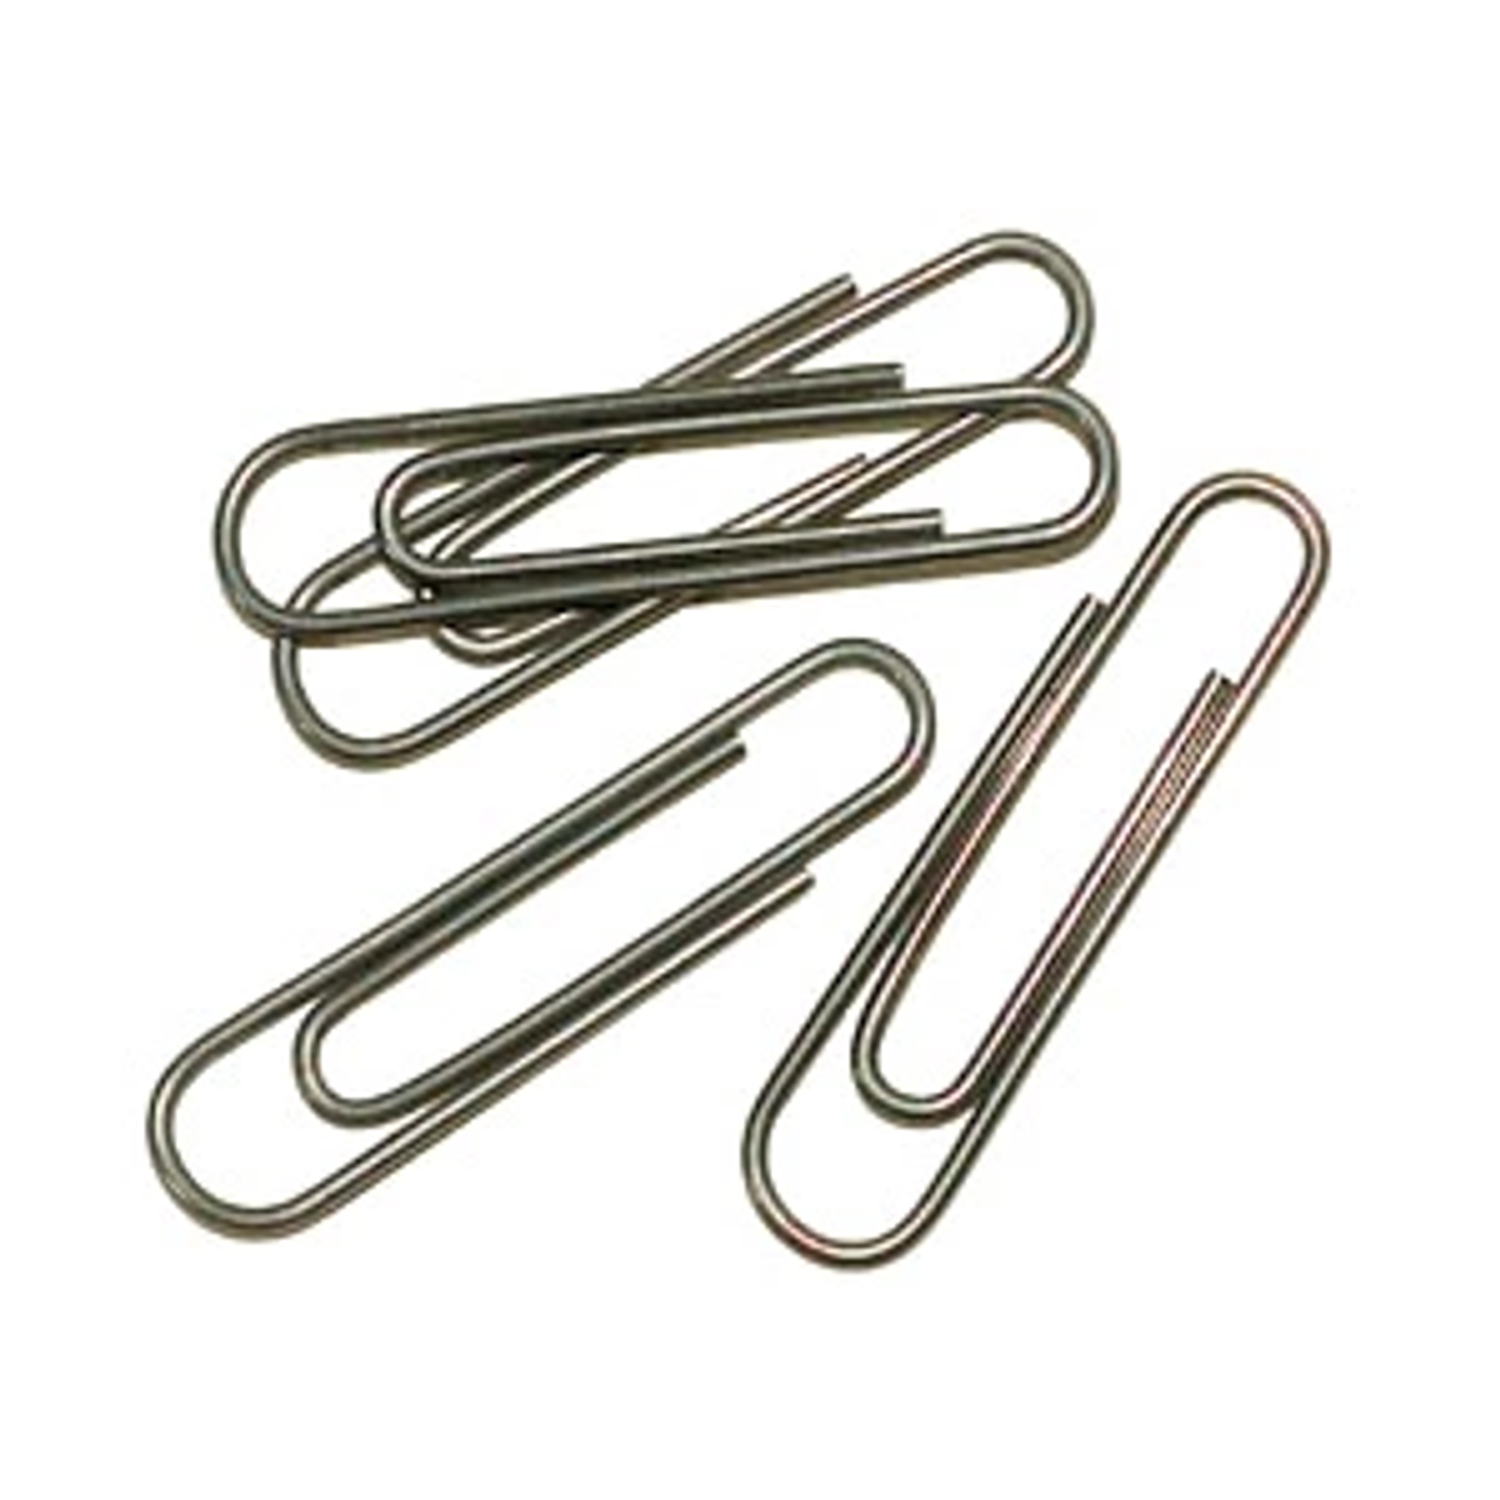 Stainless Steel Paper Clips (50-Pack) | Fasteners | Conservation ...